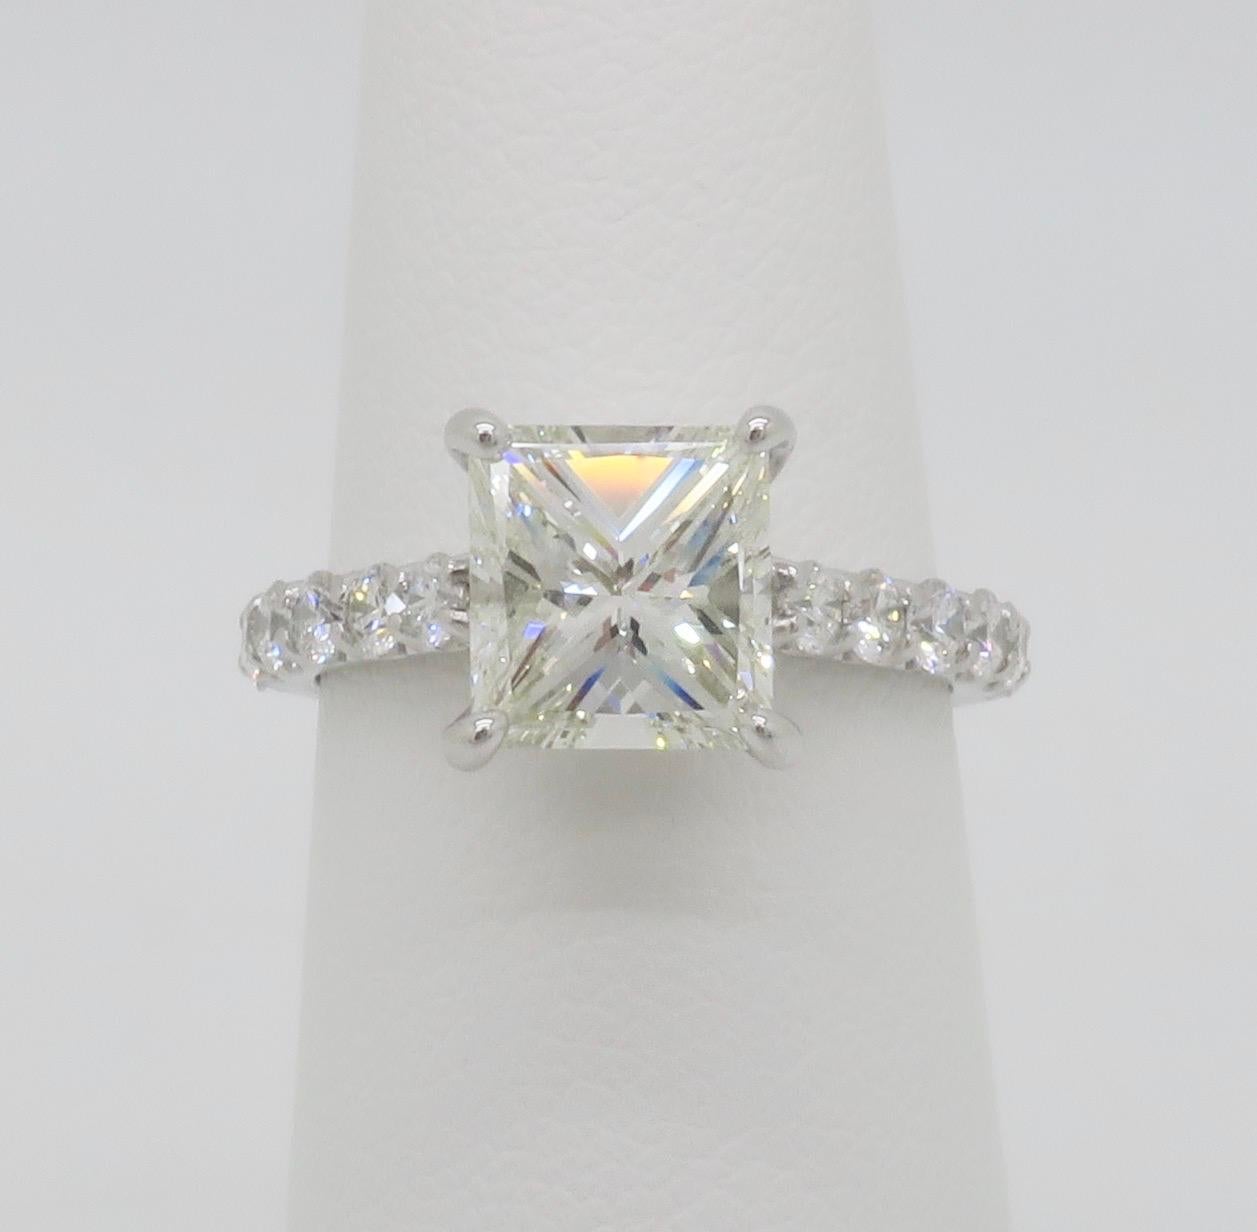 GIA Certified 2.62CTW Princess Cut Diamond Ring in 14k White Gold  In New Condition For Sale In Webster, NY